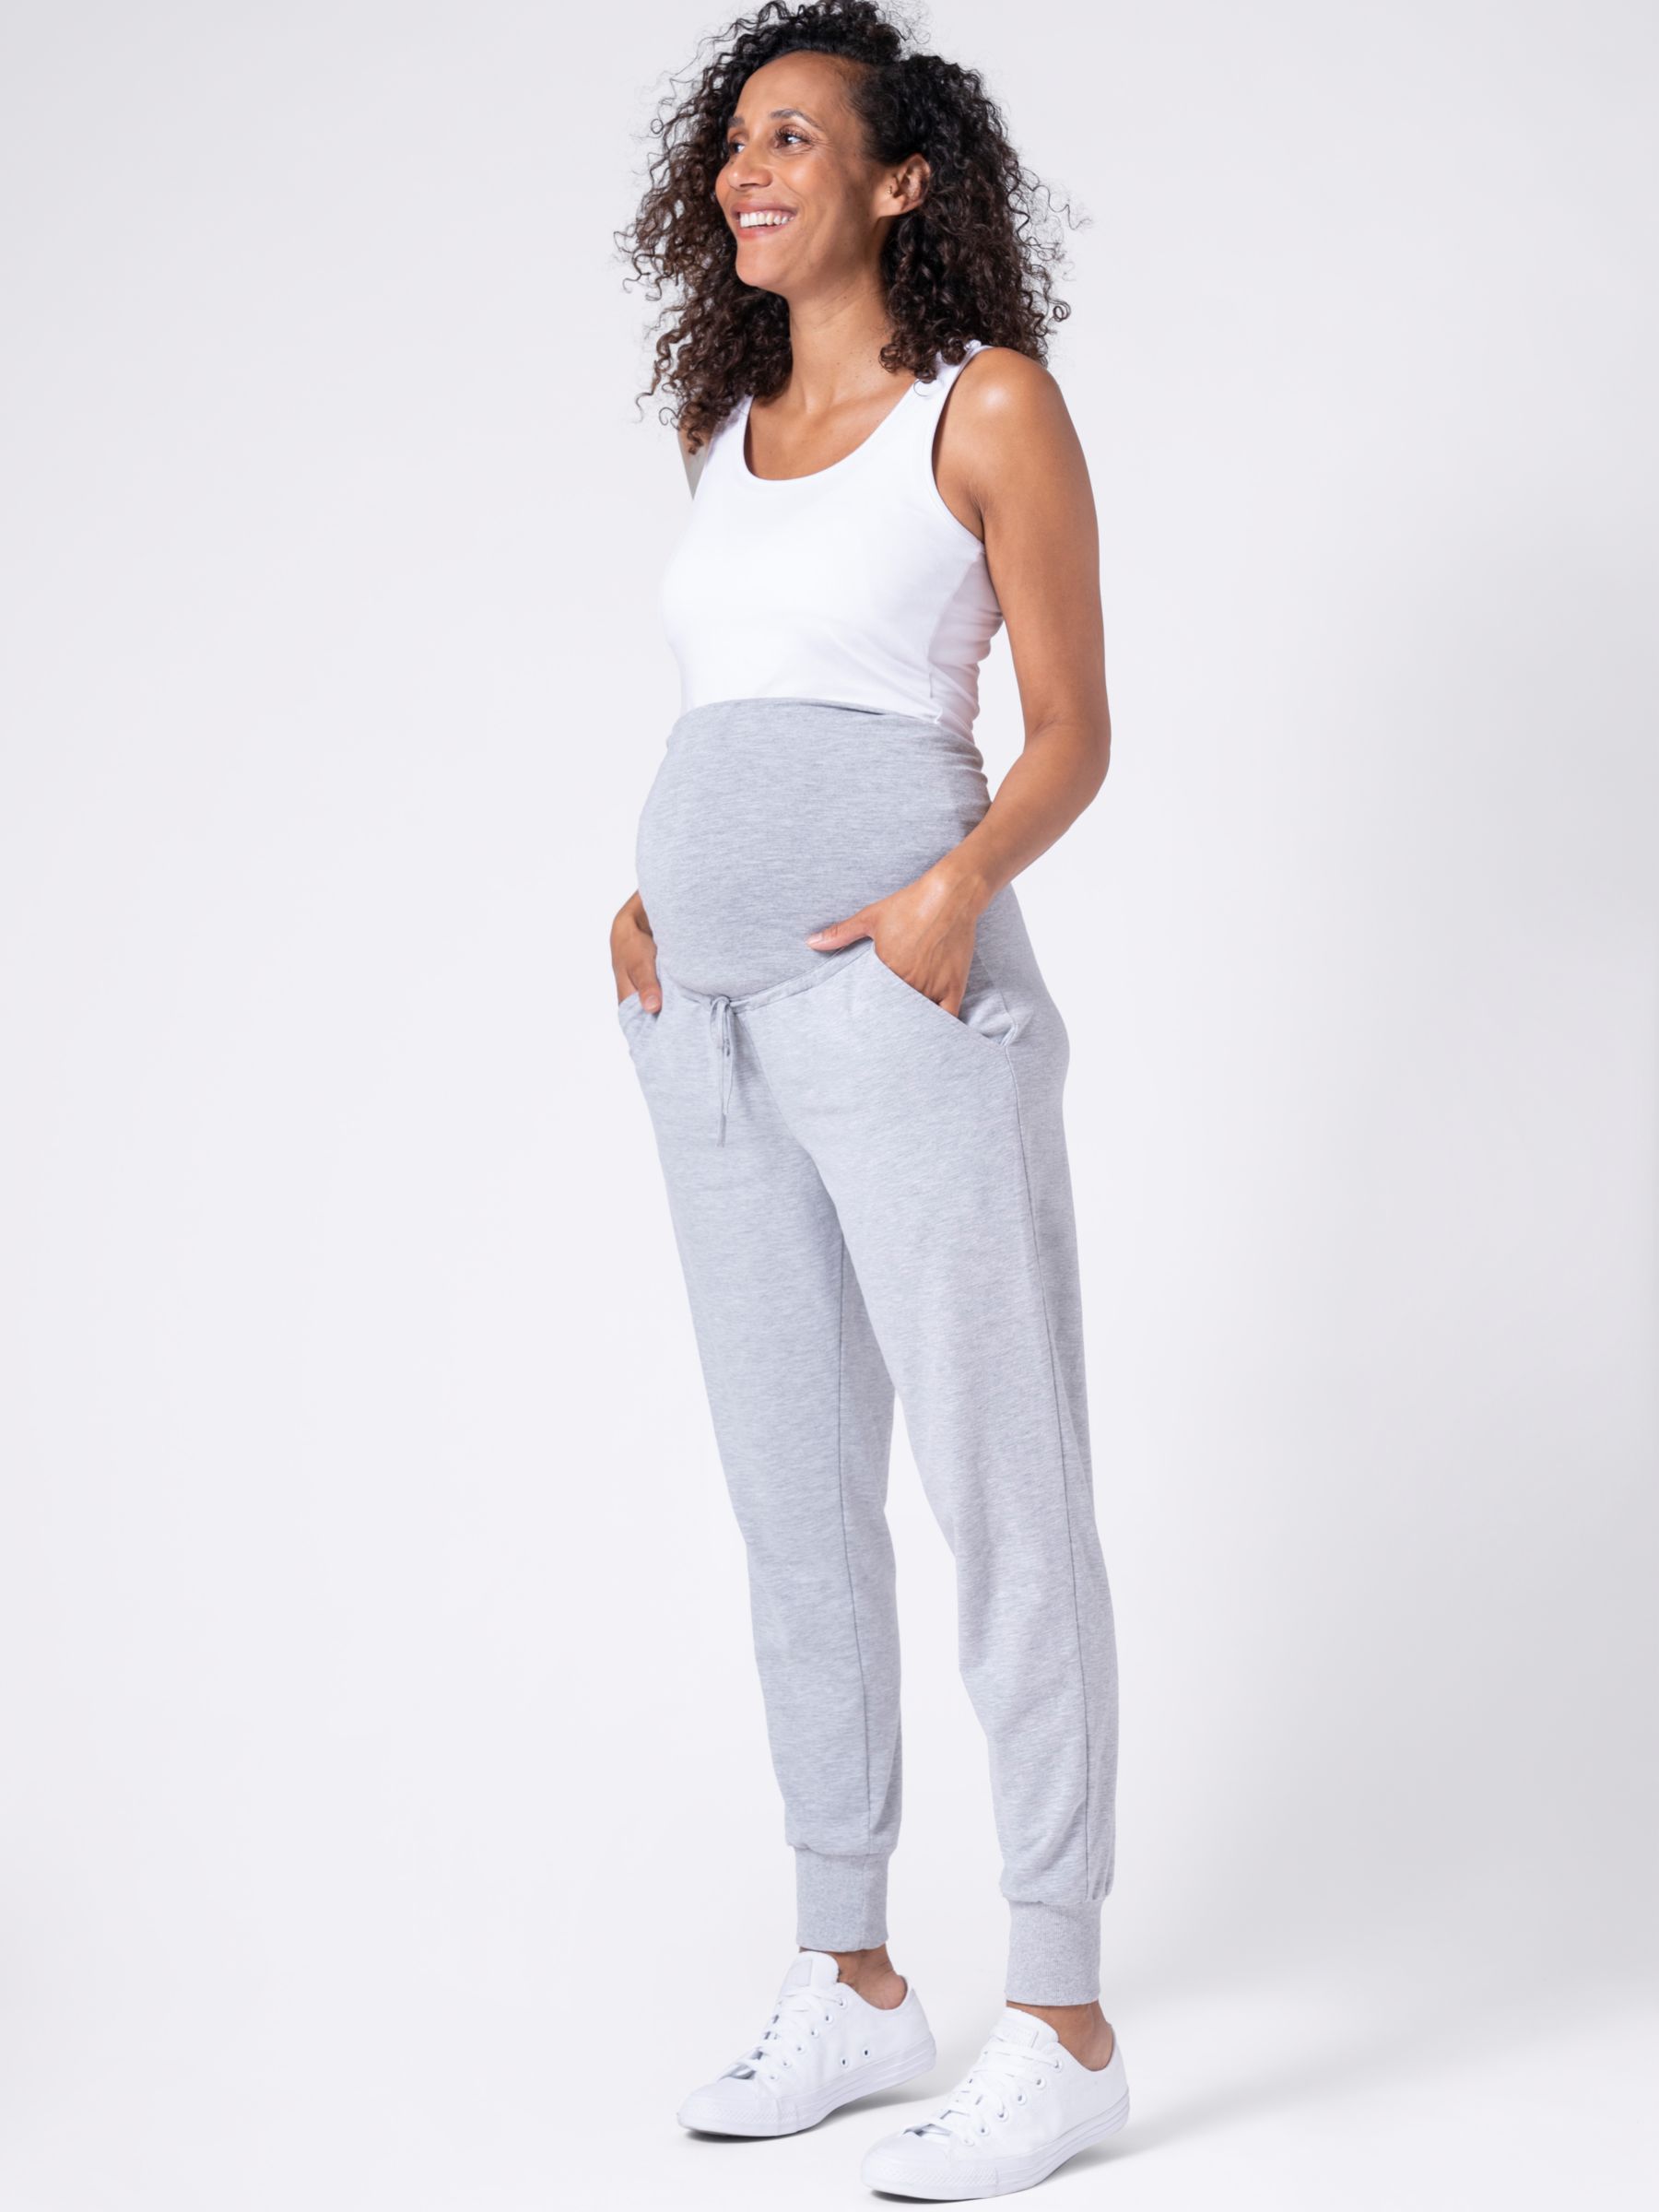 Seraphine Hadley Maternity Joggers, Pack of 2, Grey/Black